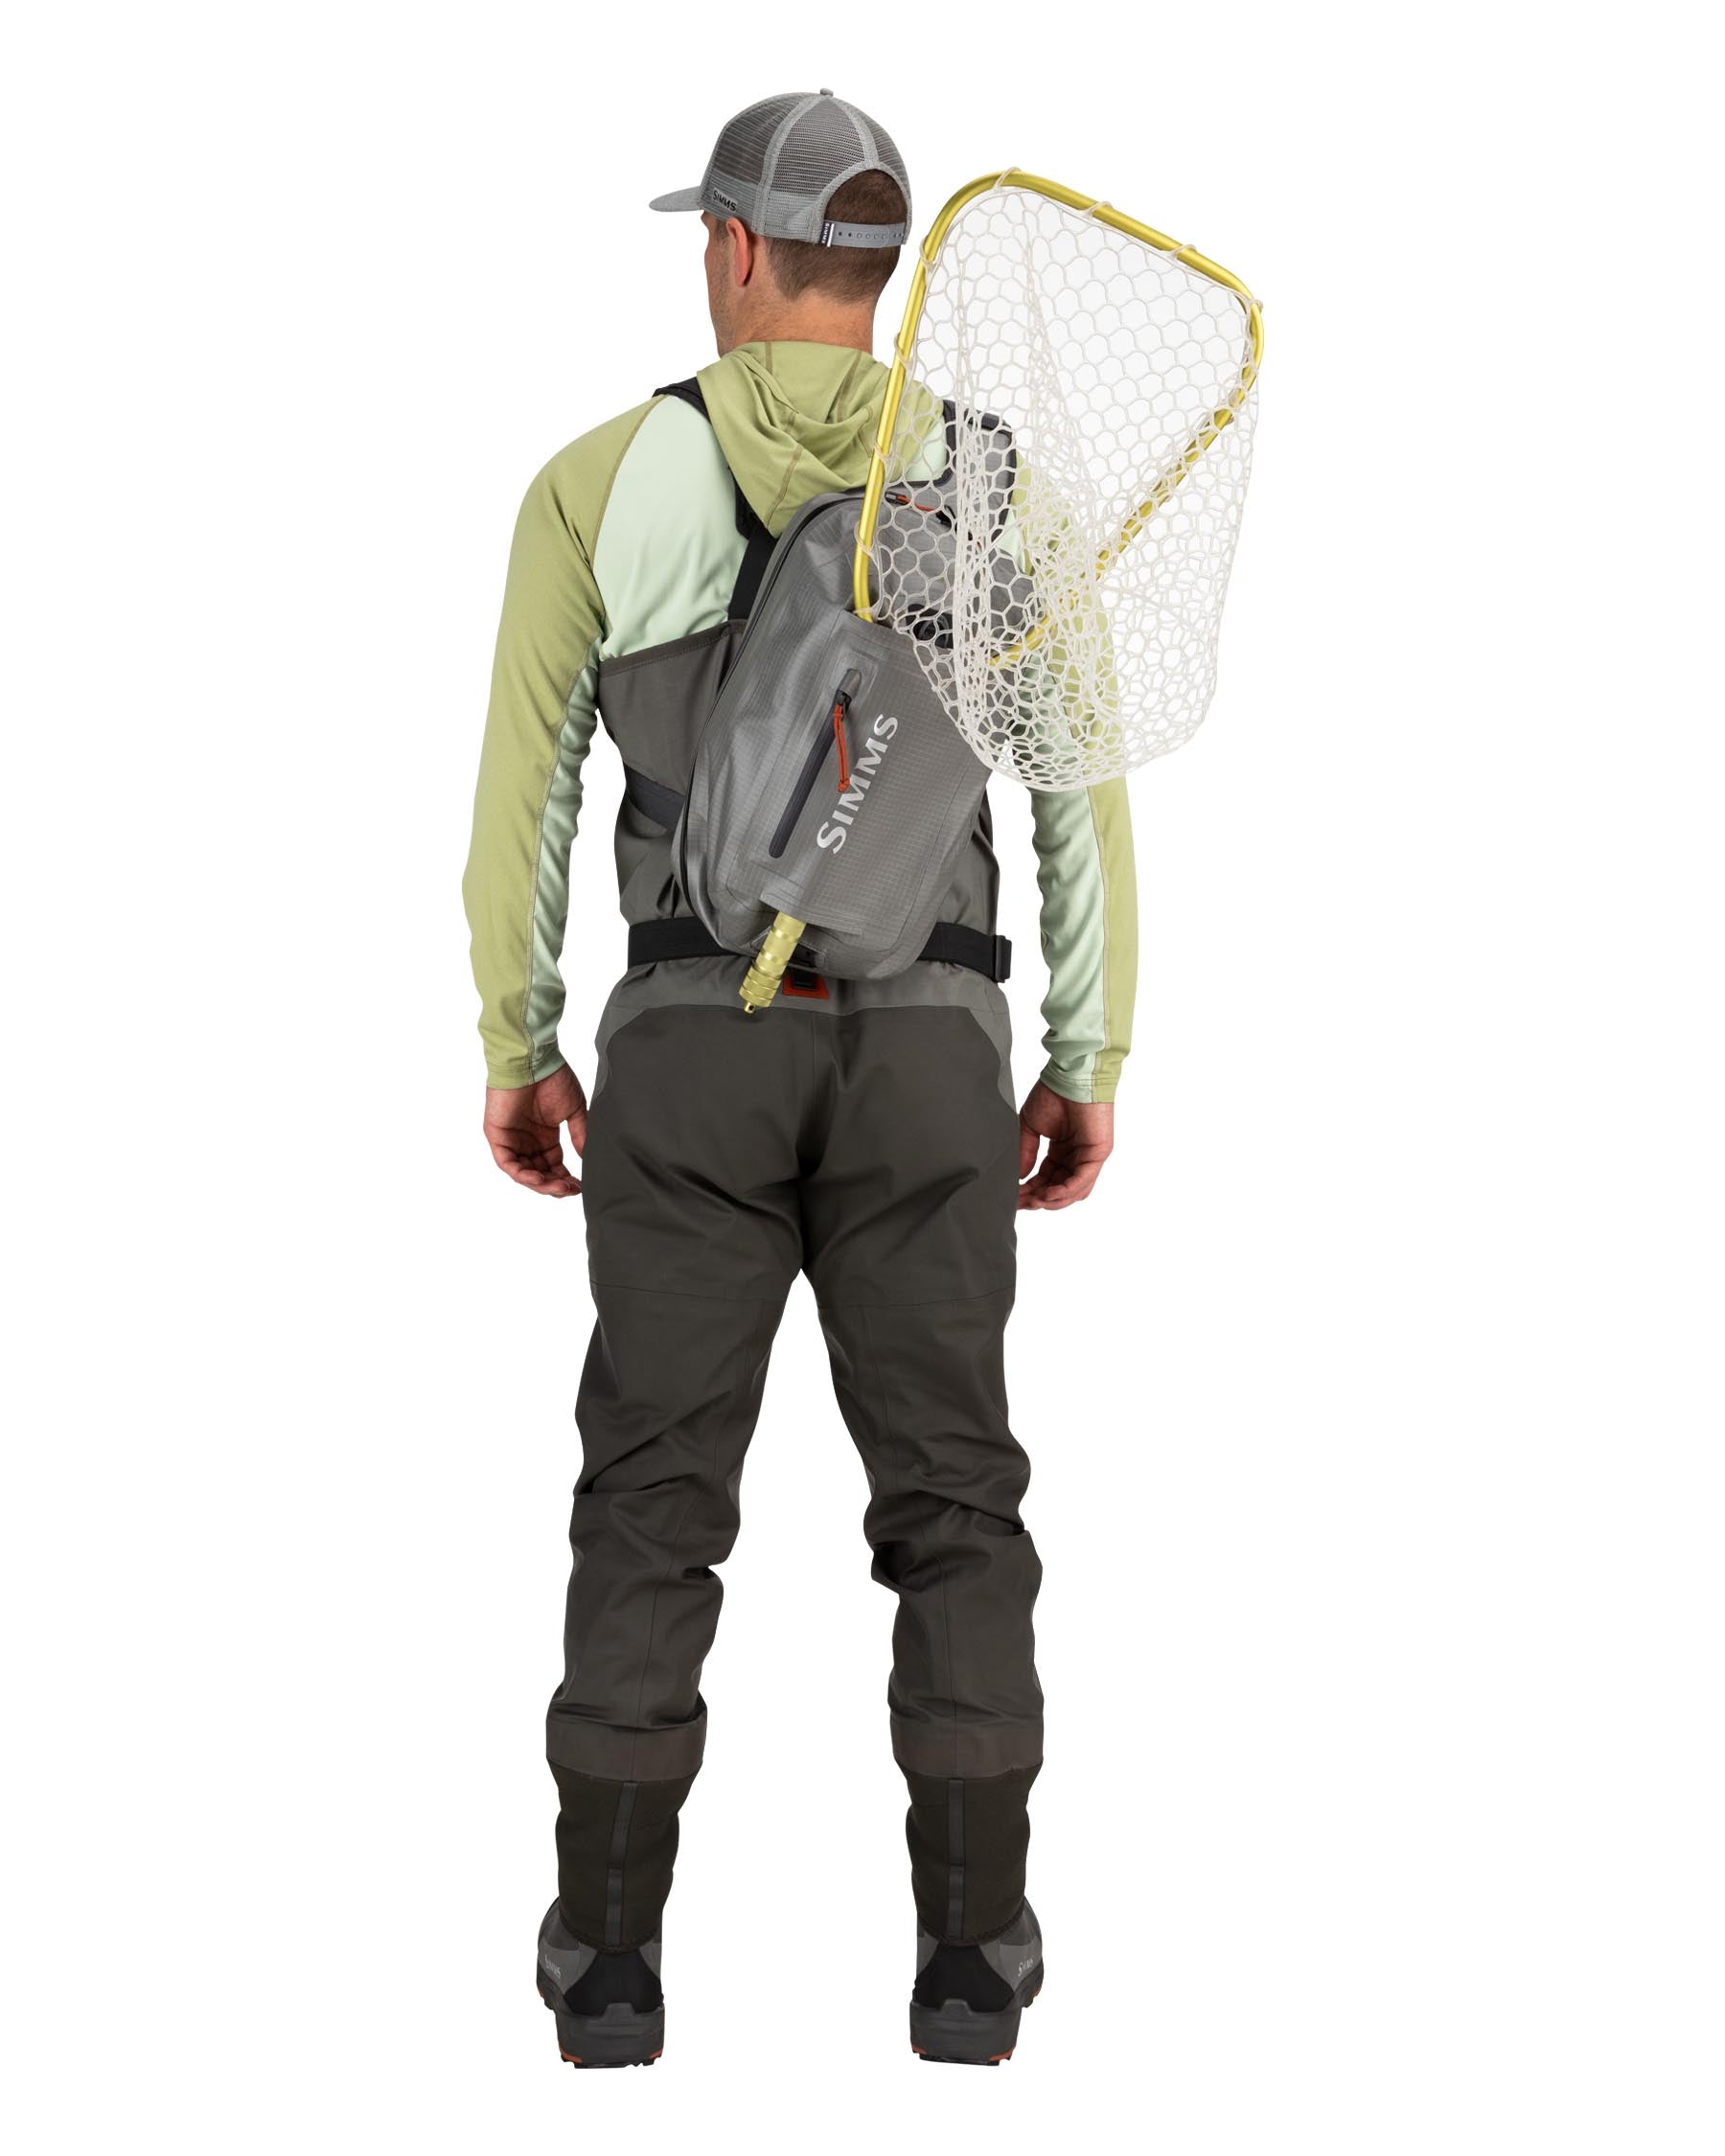 Dry Creek Z Sling | Simms Fishing Products